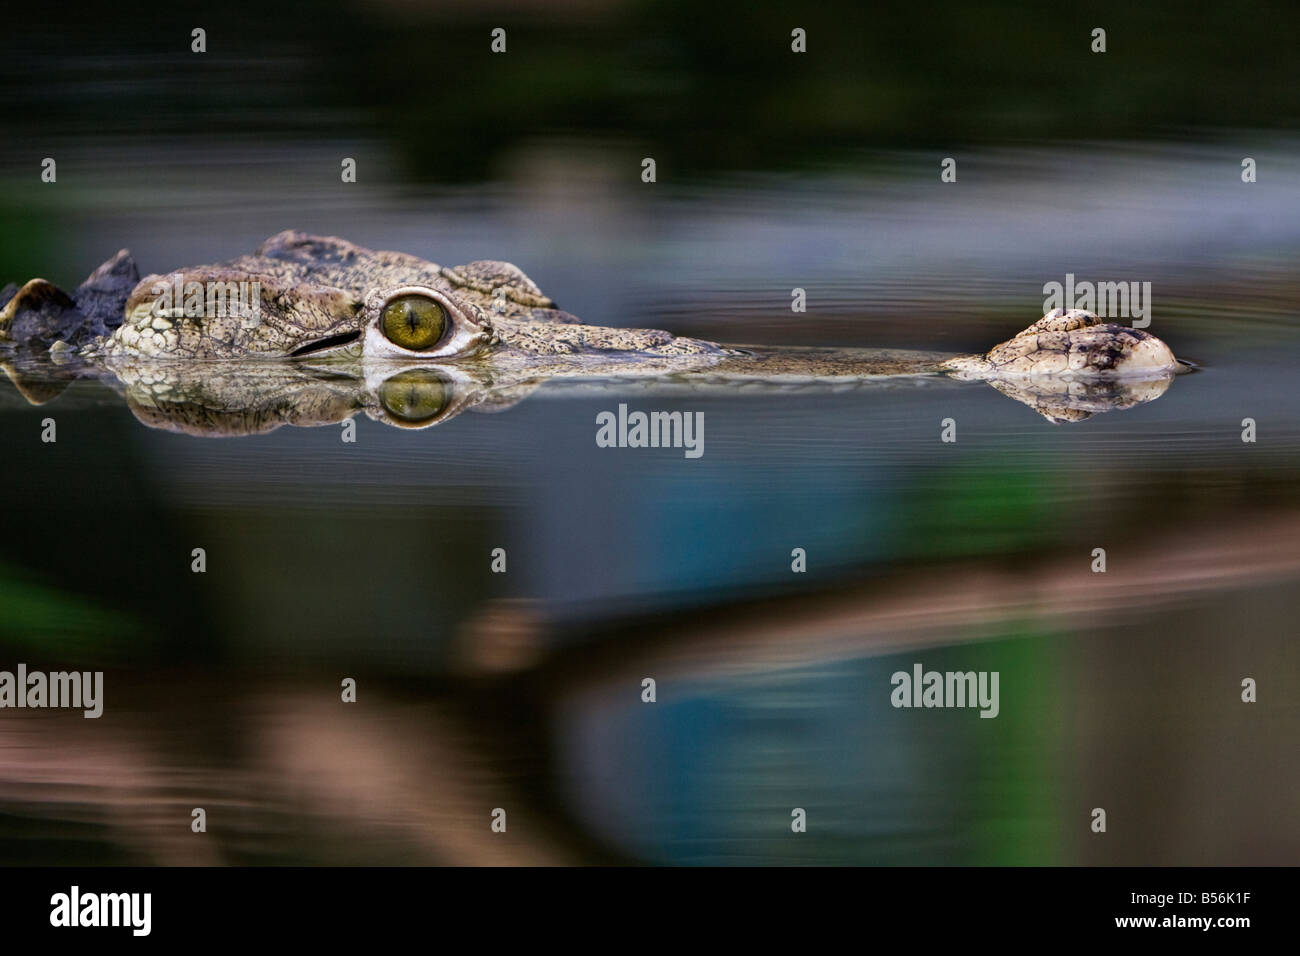 An alligator waiting patiently Stock Photo